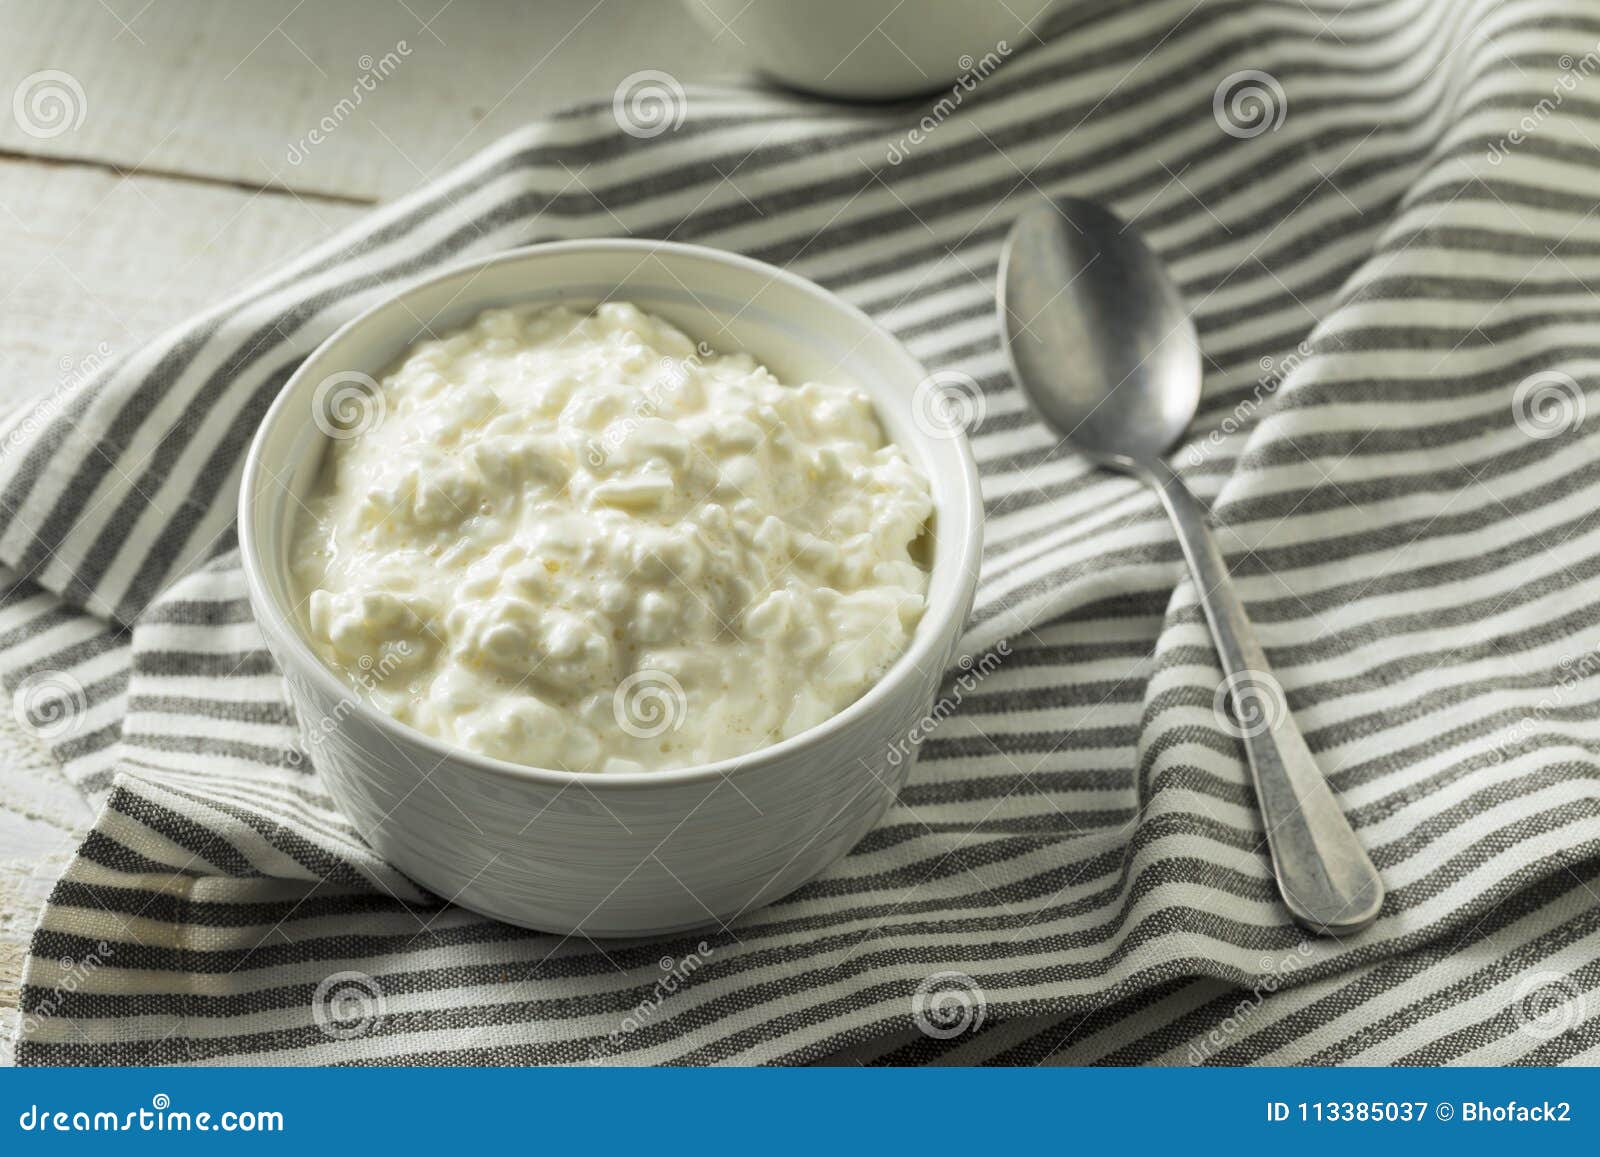 Homemade Low Fat Cottage Cheese Stock Image Image Of Protein